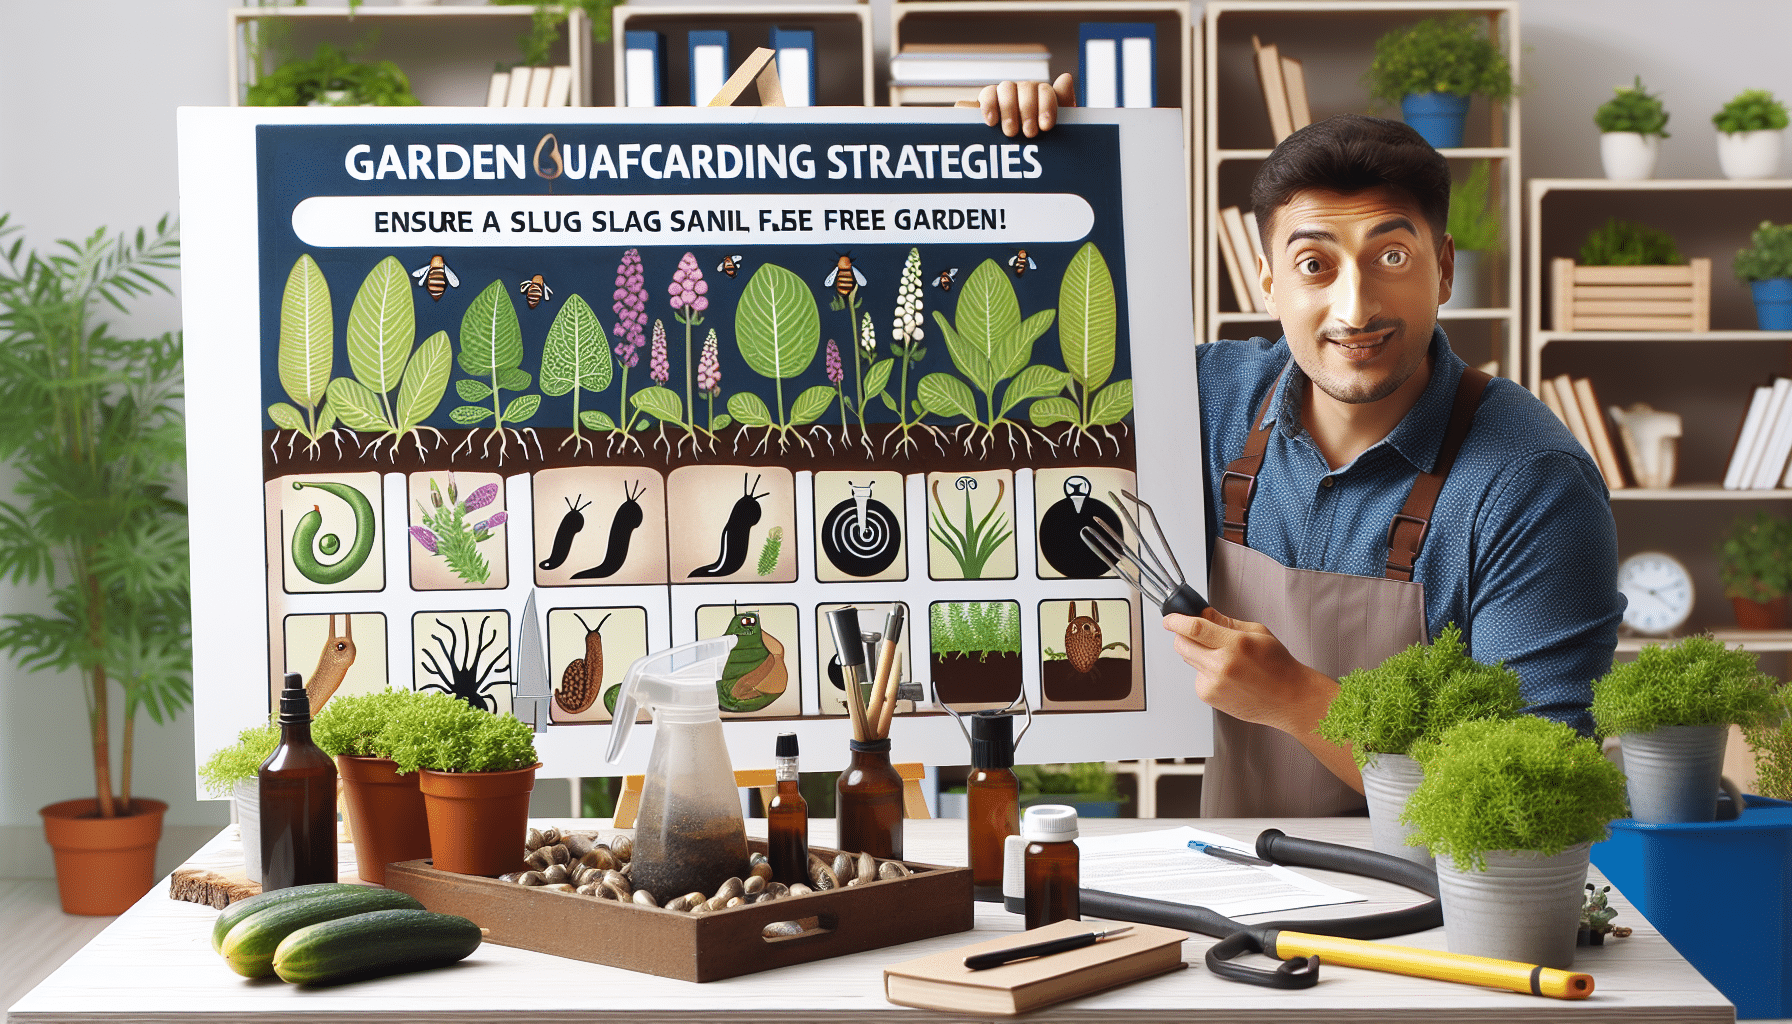 learn effective ways to deal with slugs and snails in your garden with expert tips from our horticulturalist. keep your garden healthy and beautiful with our expert advice.